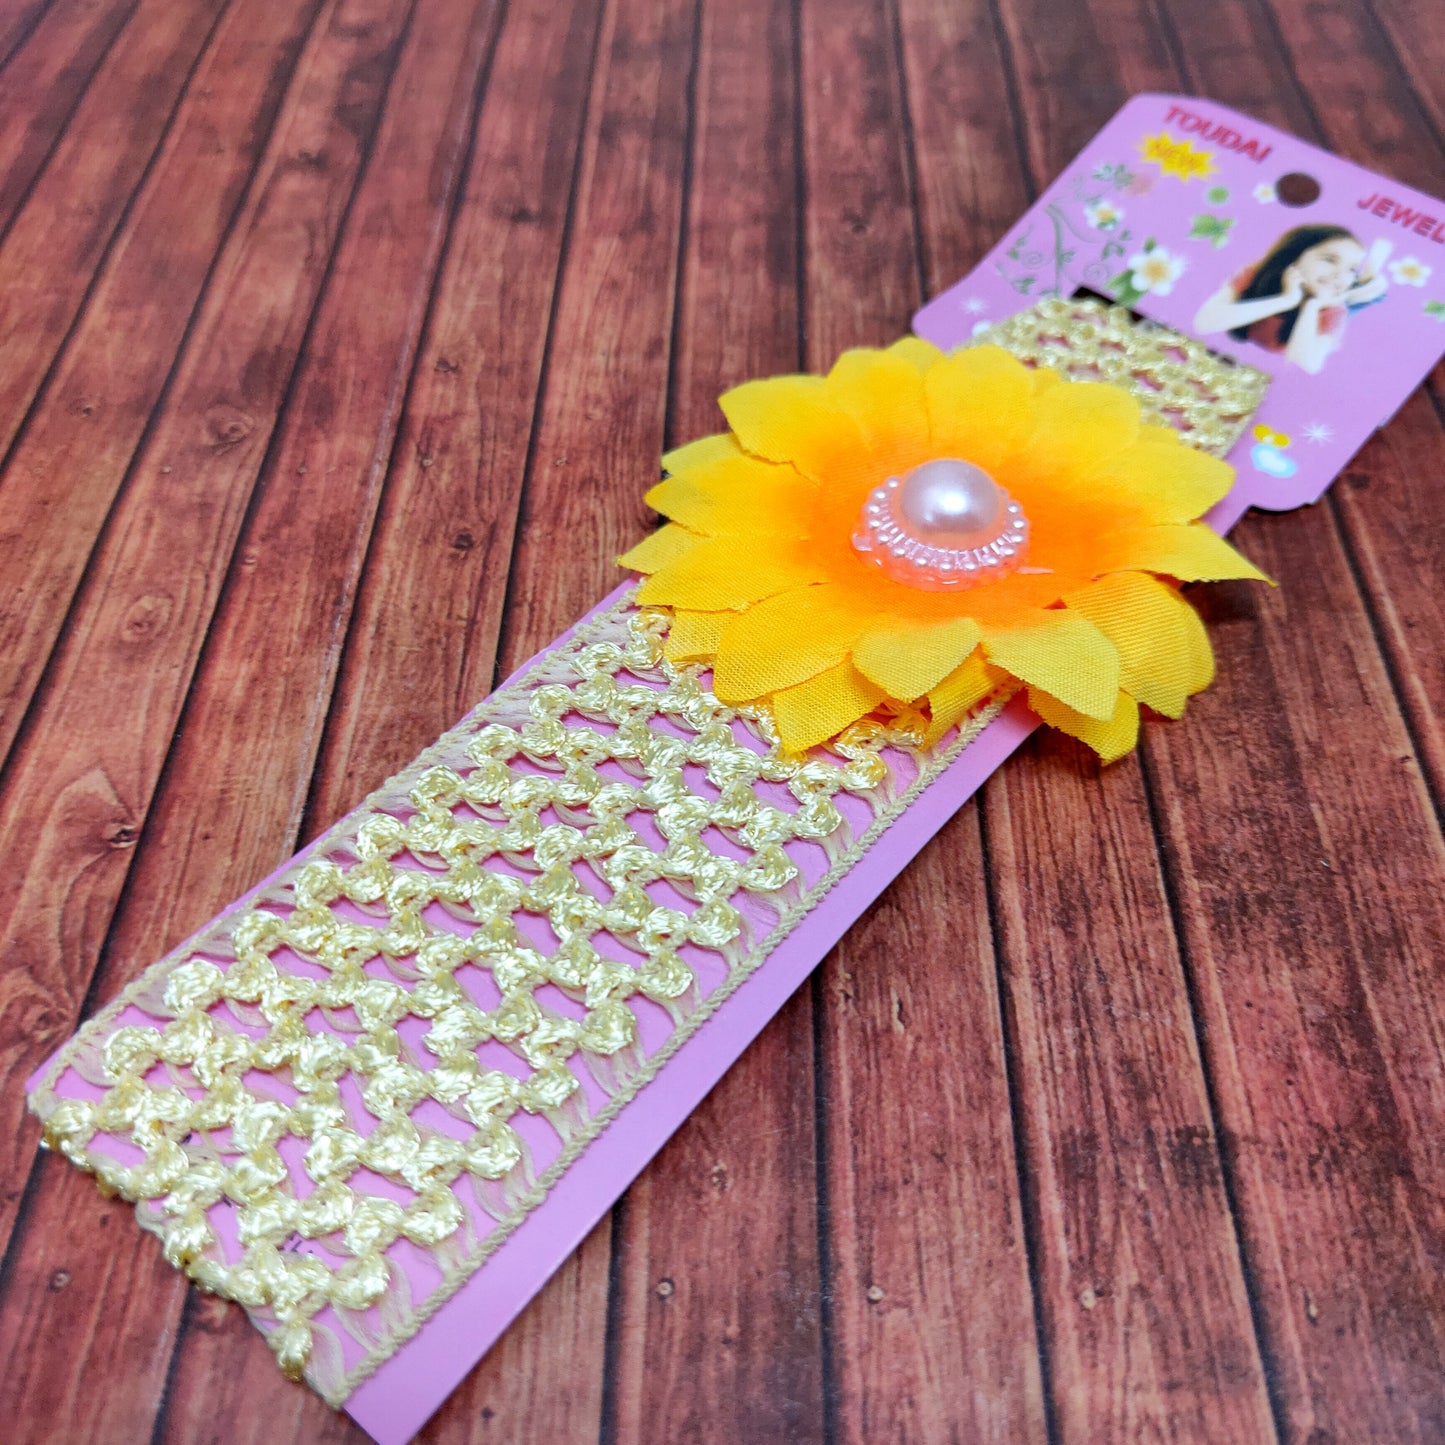 Floral Soft Stretchy Headbands for Baby Girls and Newborn (17-06 Yellow Baby Headband)